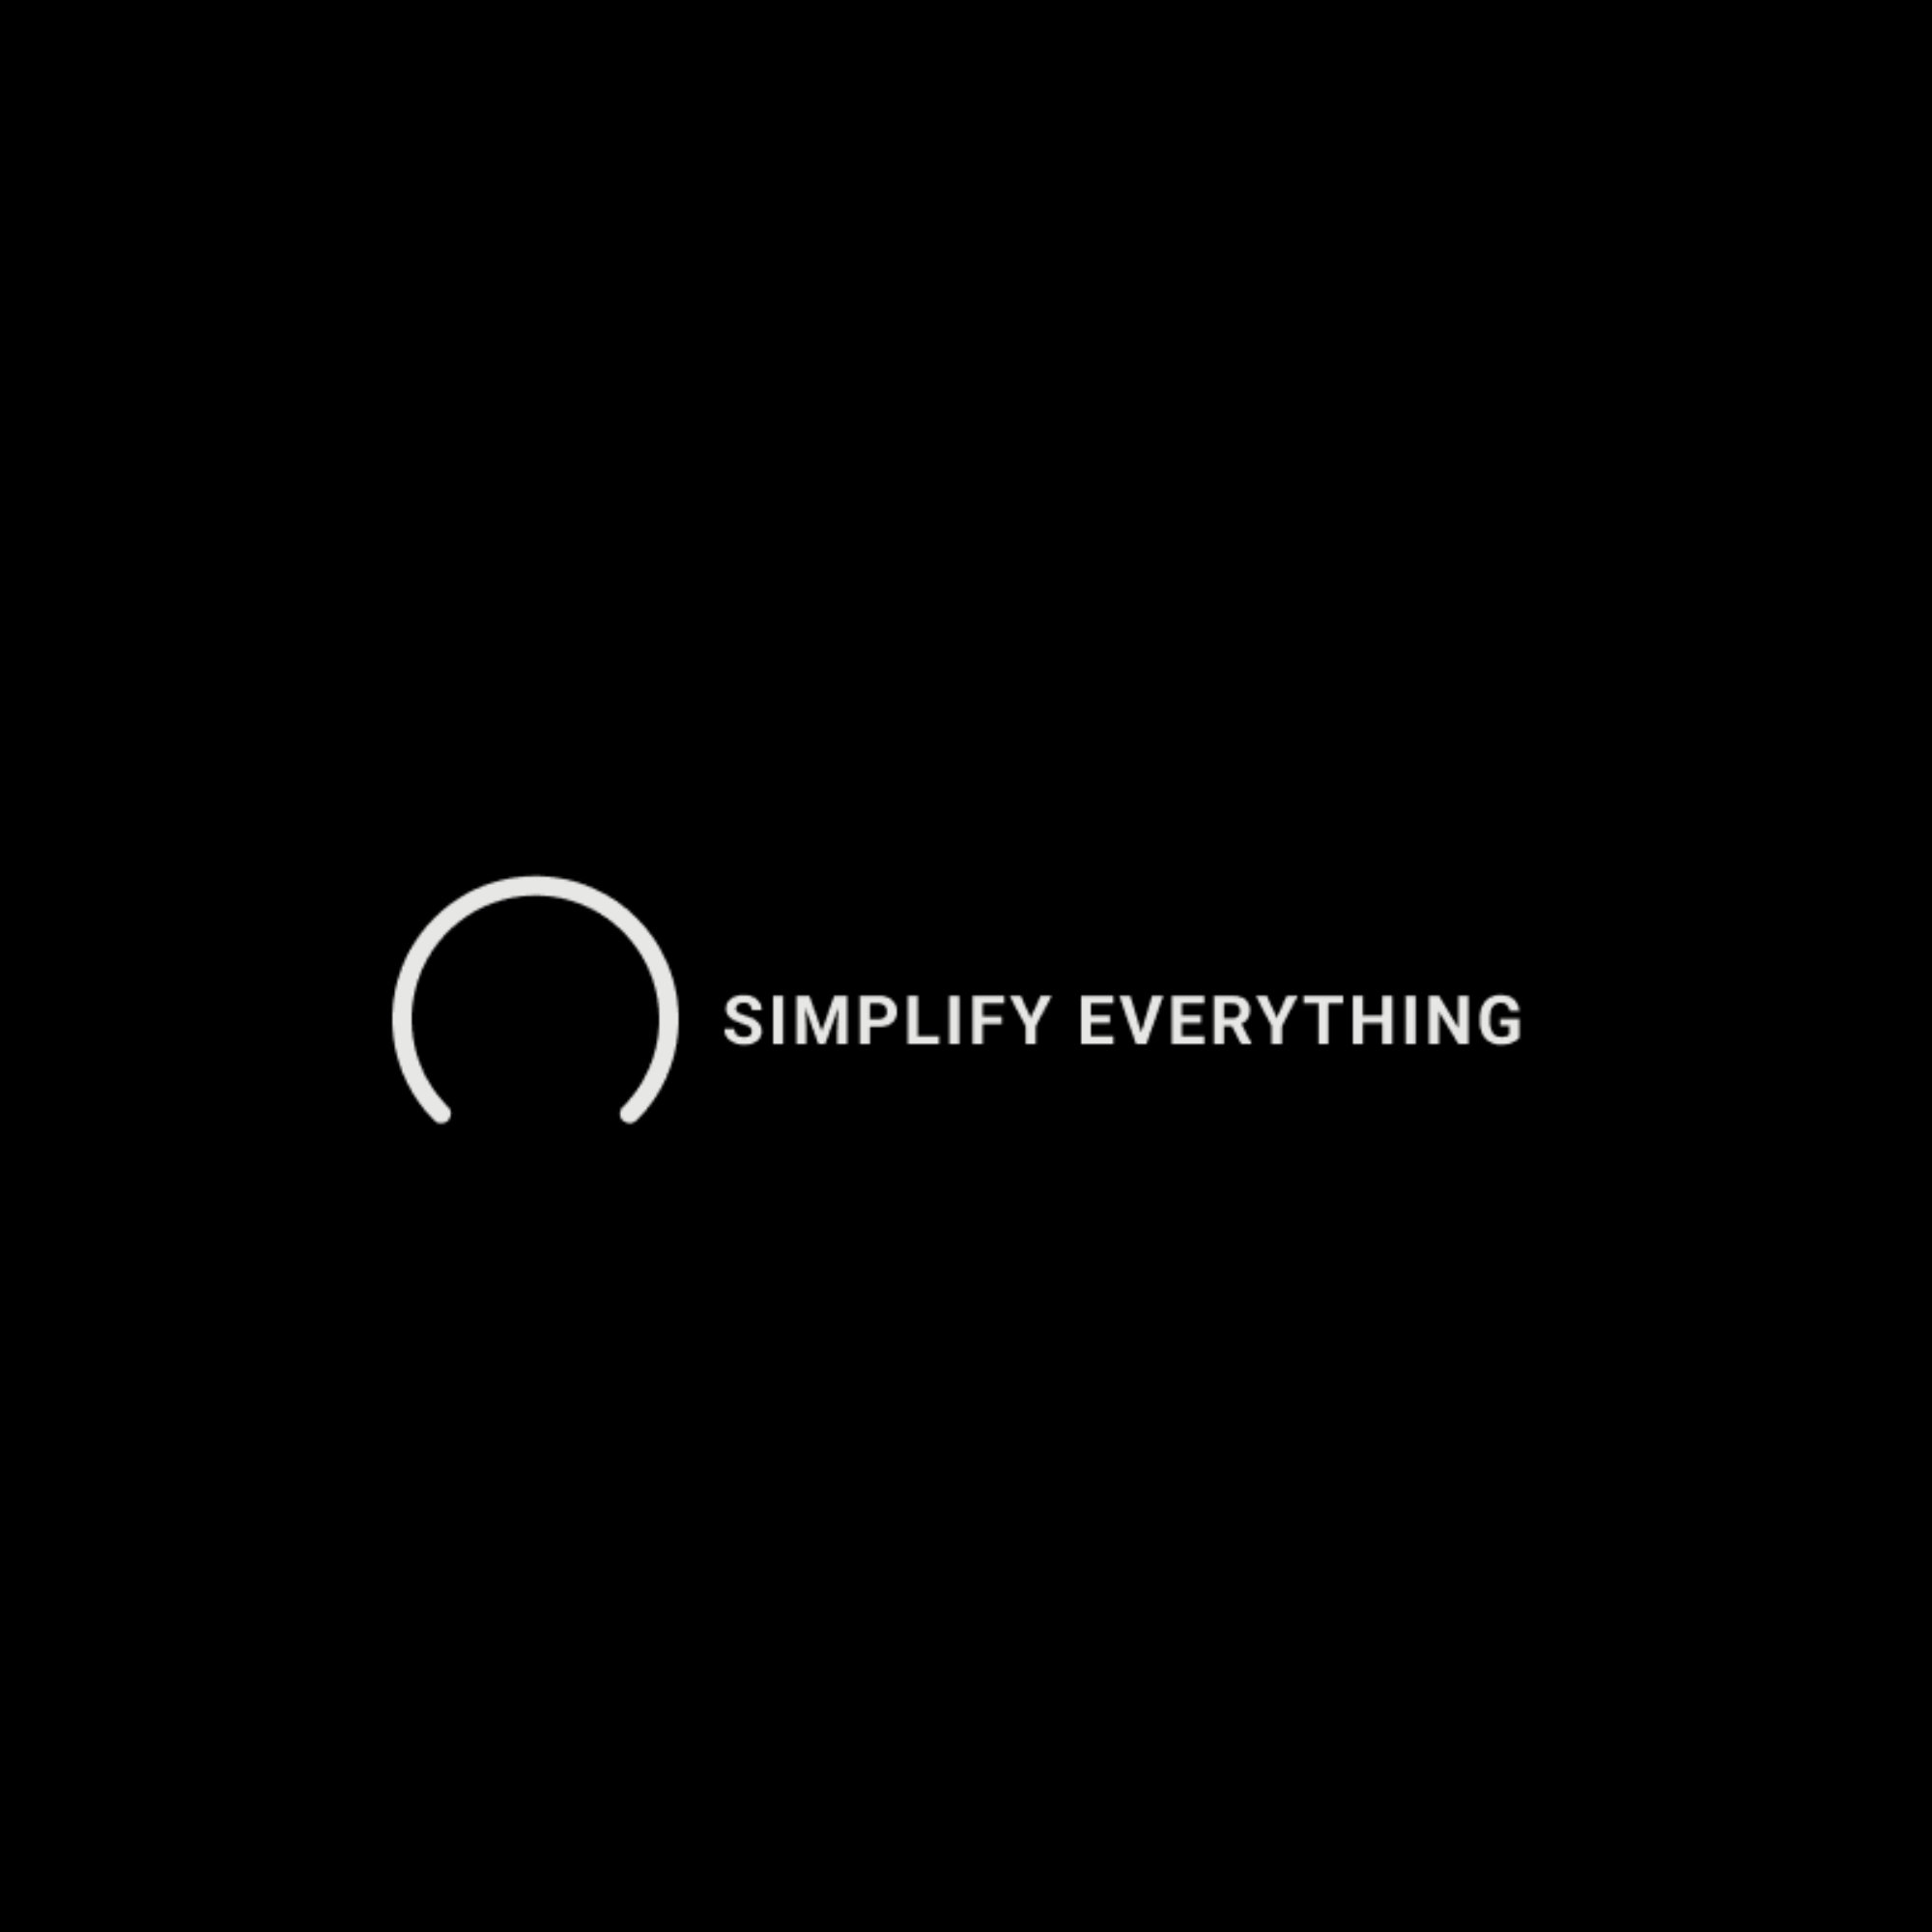 Simplify Everything by The Minimalists